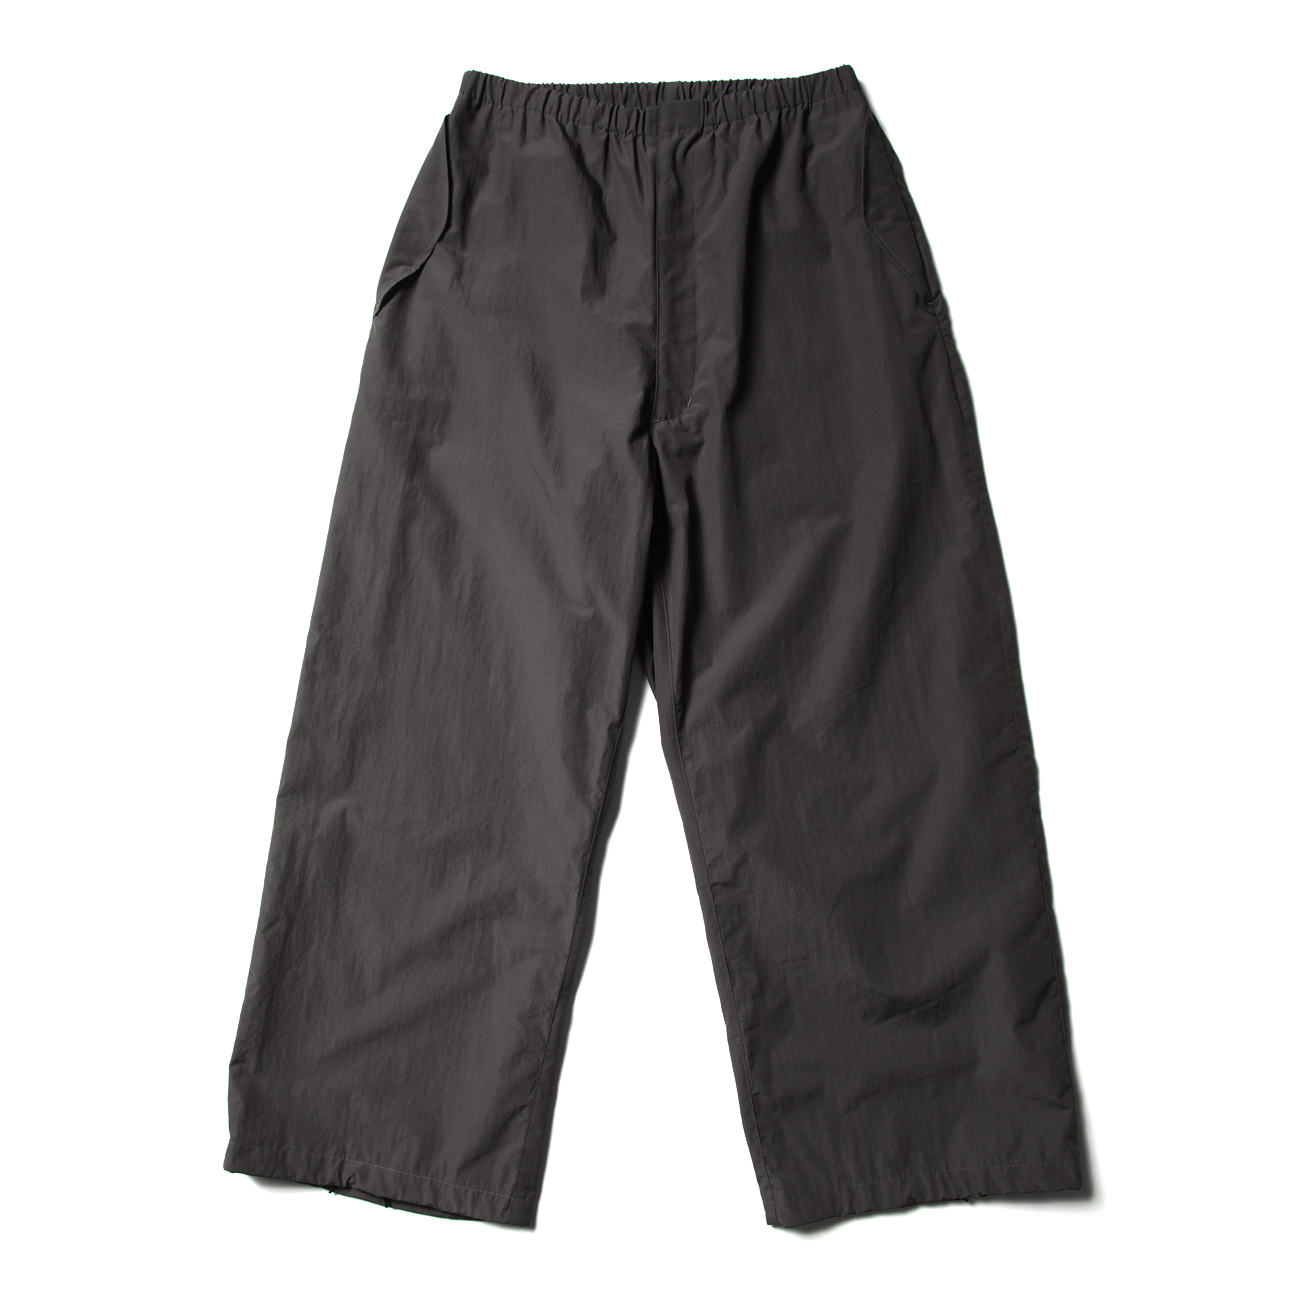 MILITARY WIDE EASY OVER PANTS - Charcoal